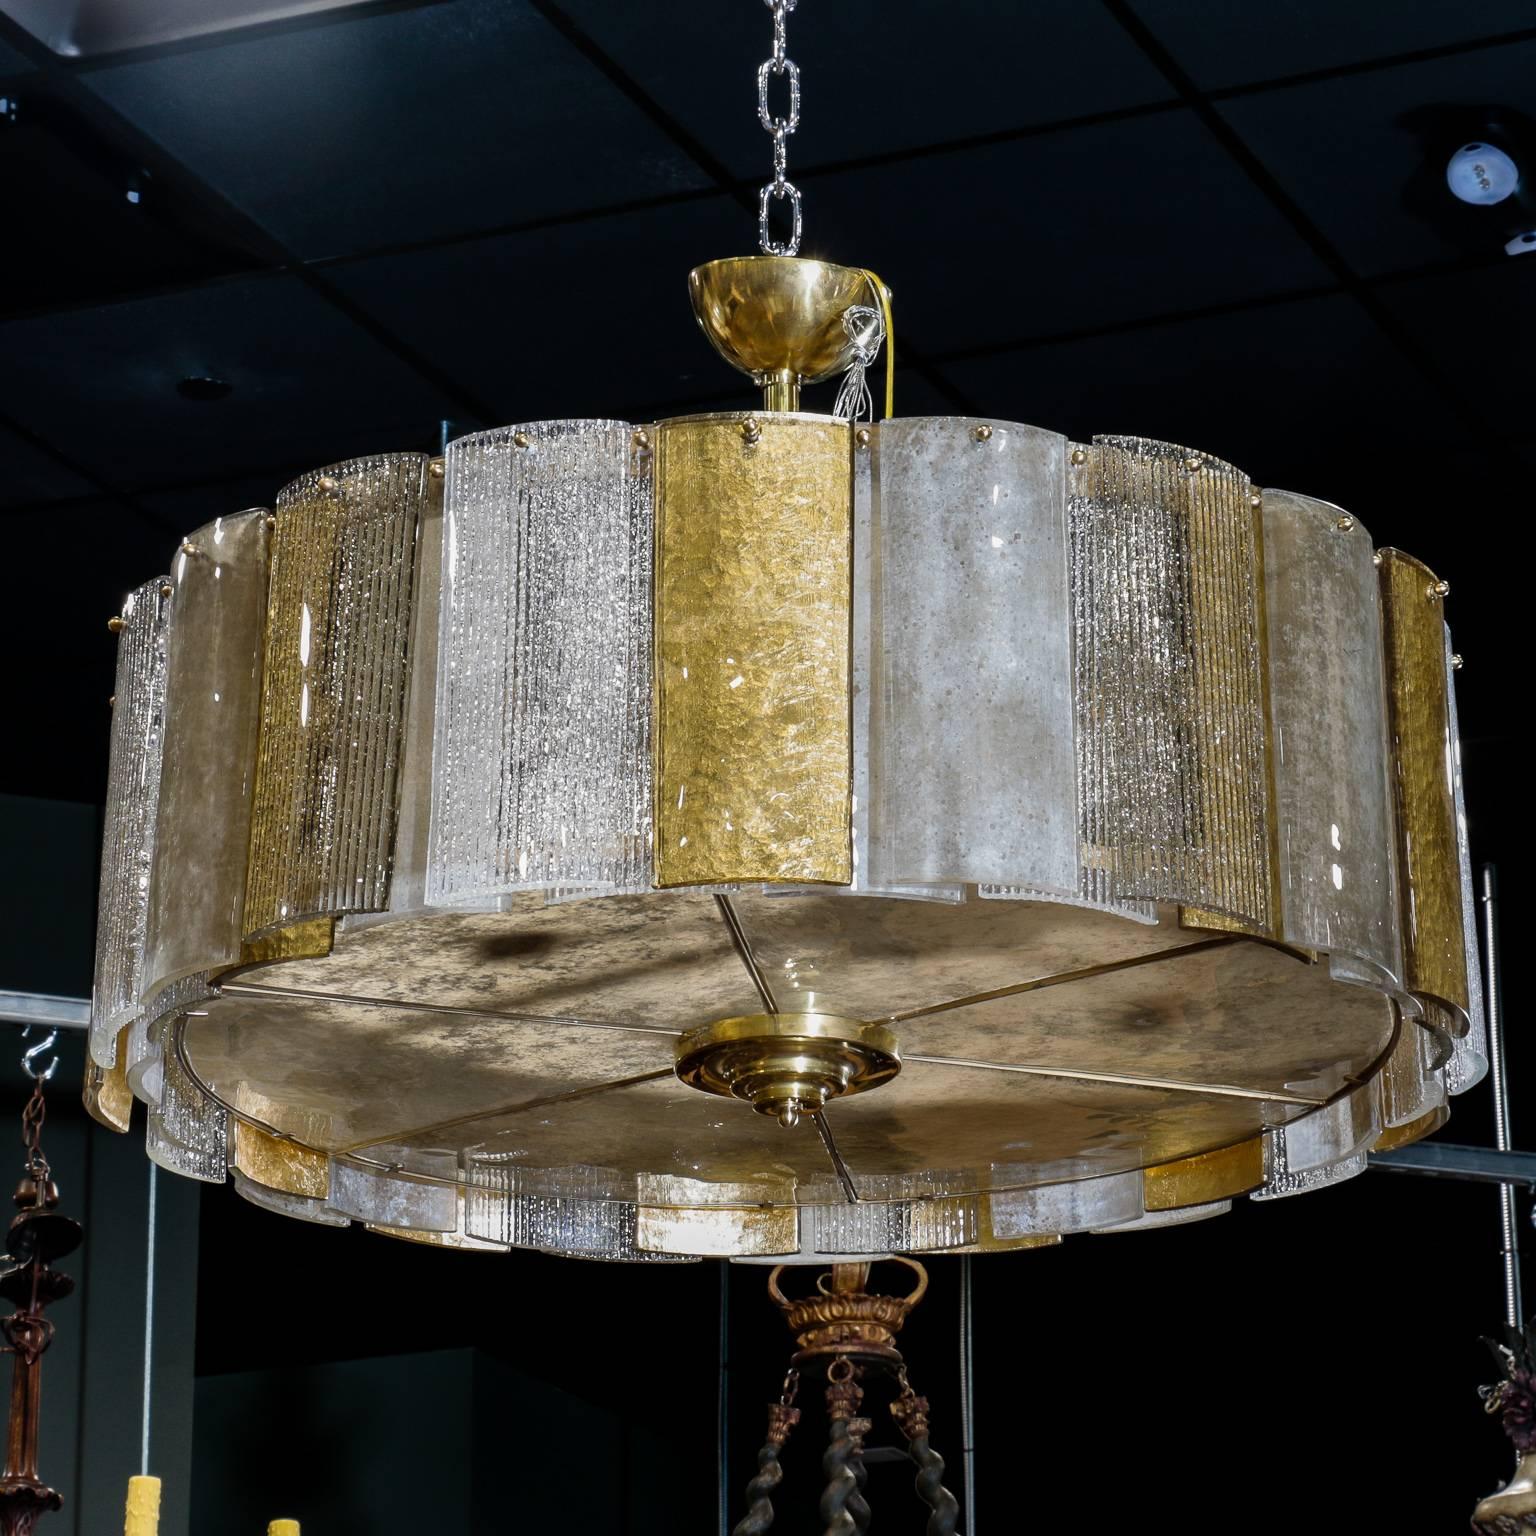 Mid-Century round hanging Murano glass lighting fixture dates from the 1970s. Drum shaped fixture is 36” diameter and consists of clear and gold colored panels of Murano glass with brass tone metal frame and ceiling canopy. New electrical wiring for